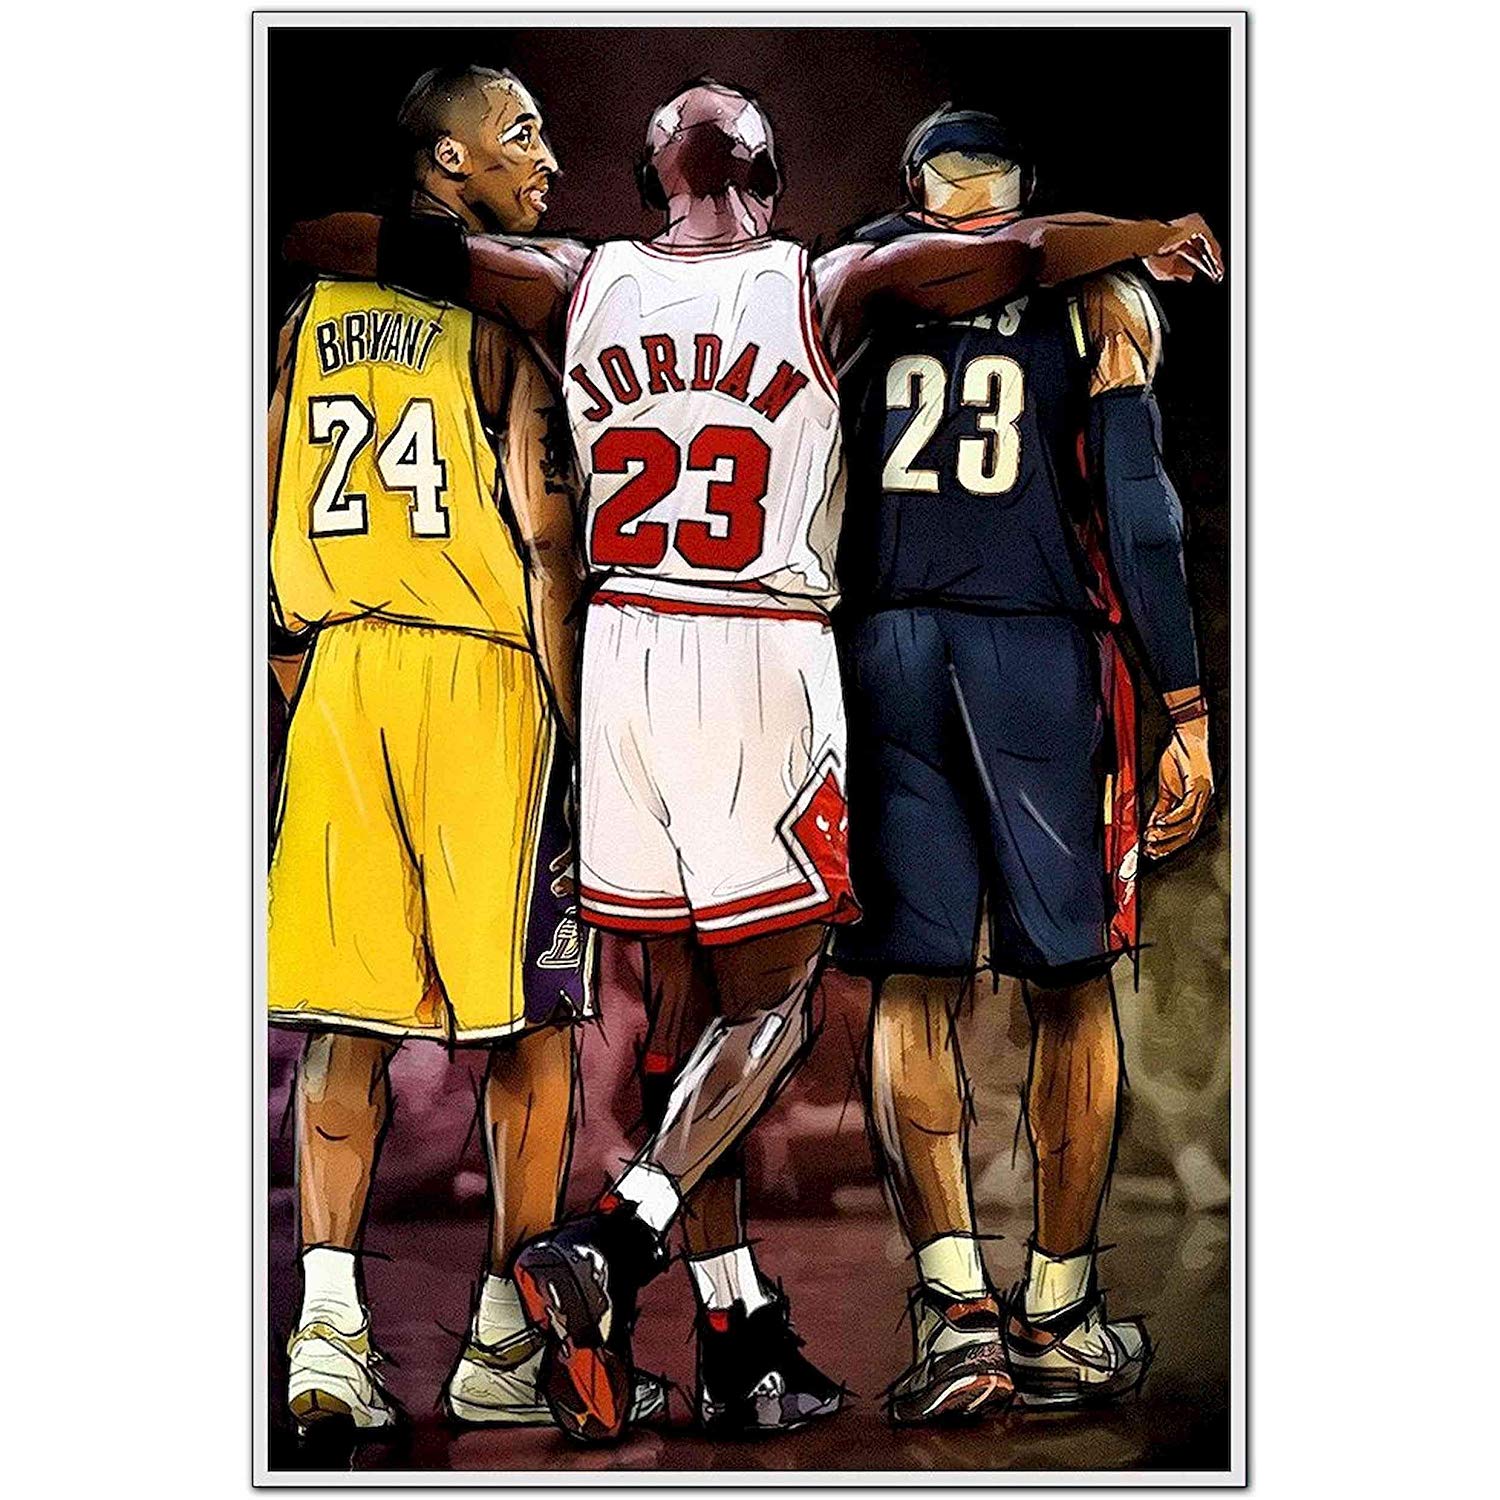 In preparation for MJ speaking at Kobes HOF induction heres my latest  tribute art   rlakers